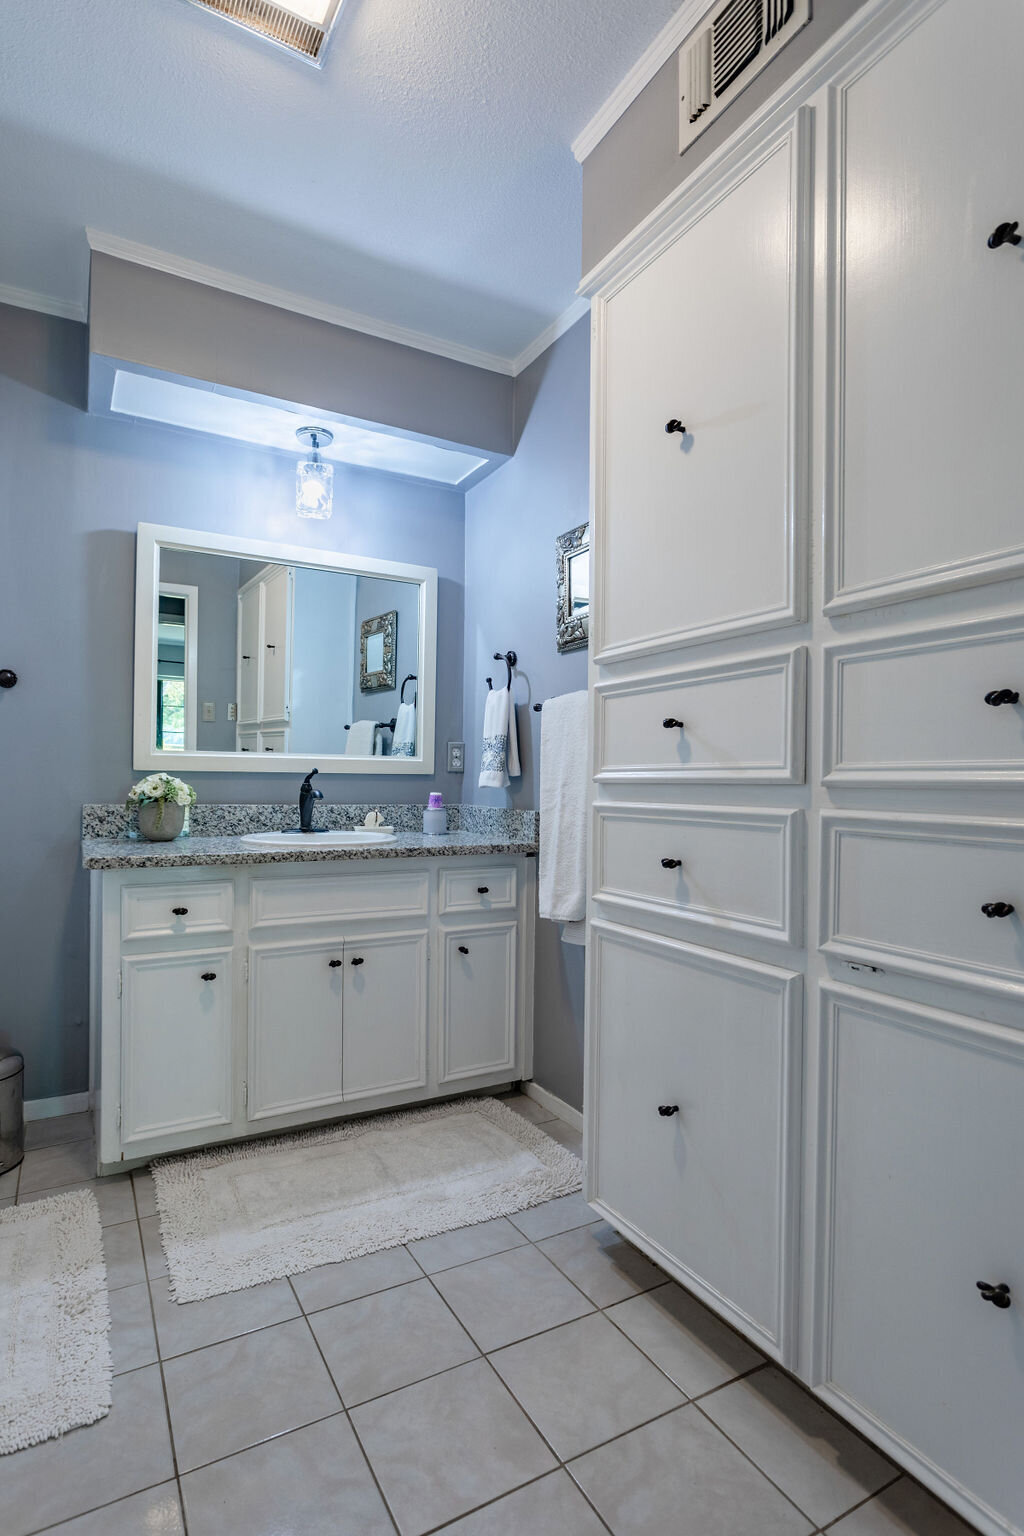 Bathroom with large single vanity and plenty of storage space in this 5-bedroom, 4-bathroom vacation rental house for 16+ guests with pool, free wifi, guesthouse and game room just 20 minutes away from downtown Waco, TX.